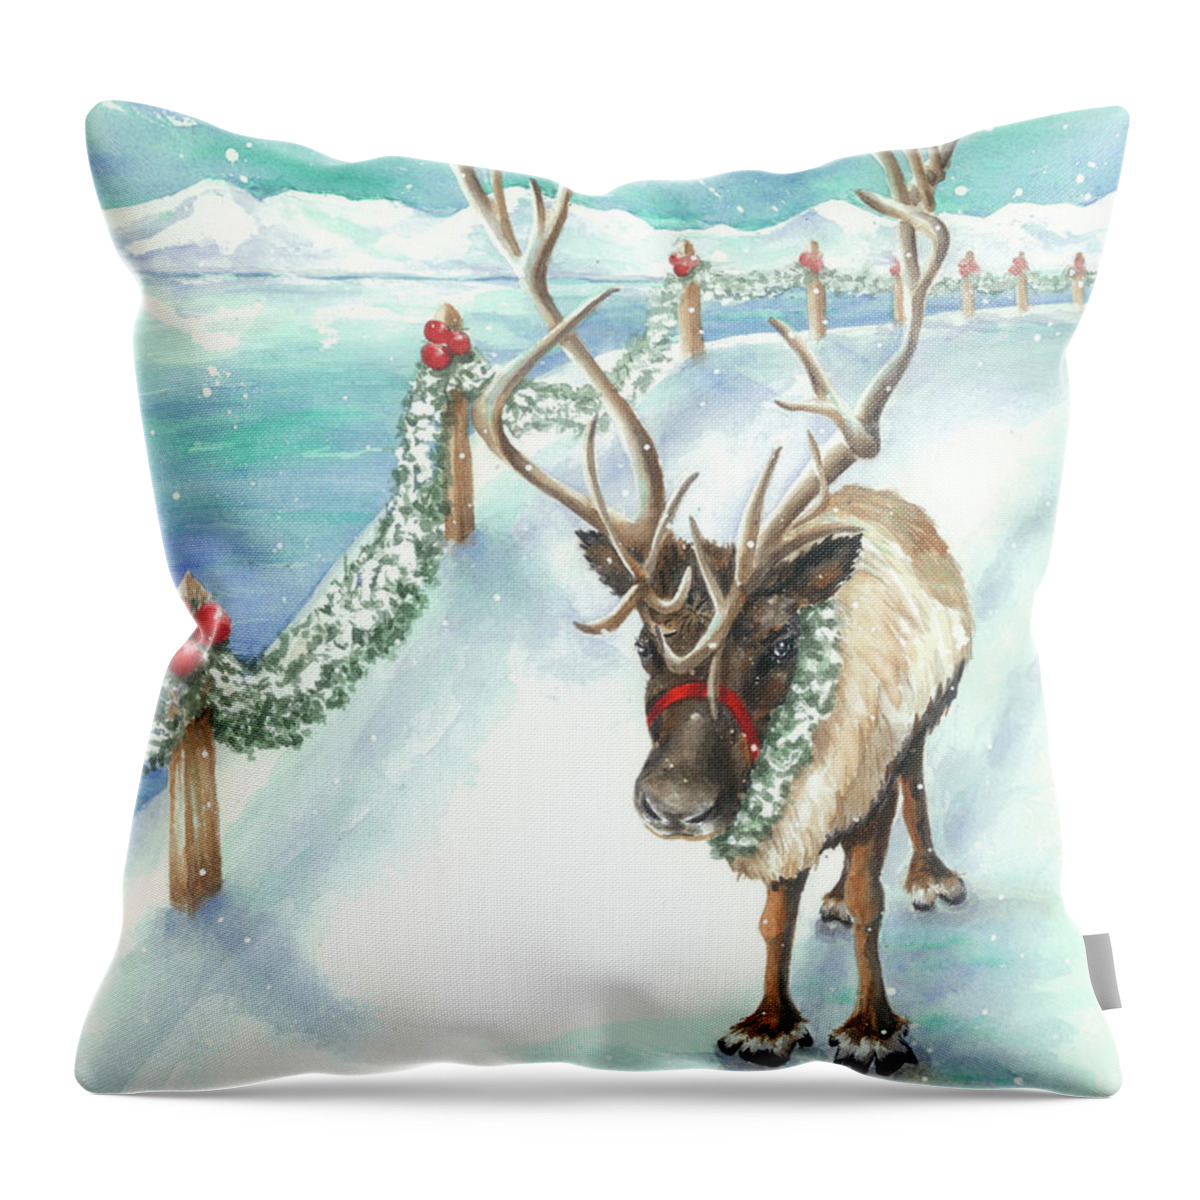 Reindeer Throw Pillow featuring the painting Tranquil Trek by Lori Taylor